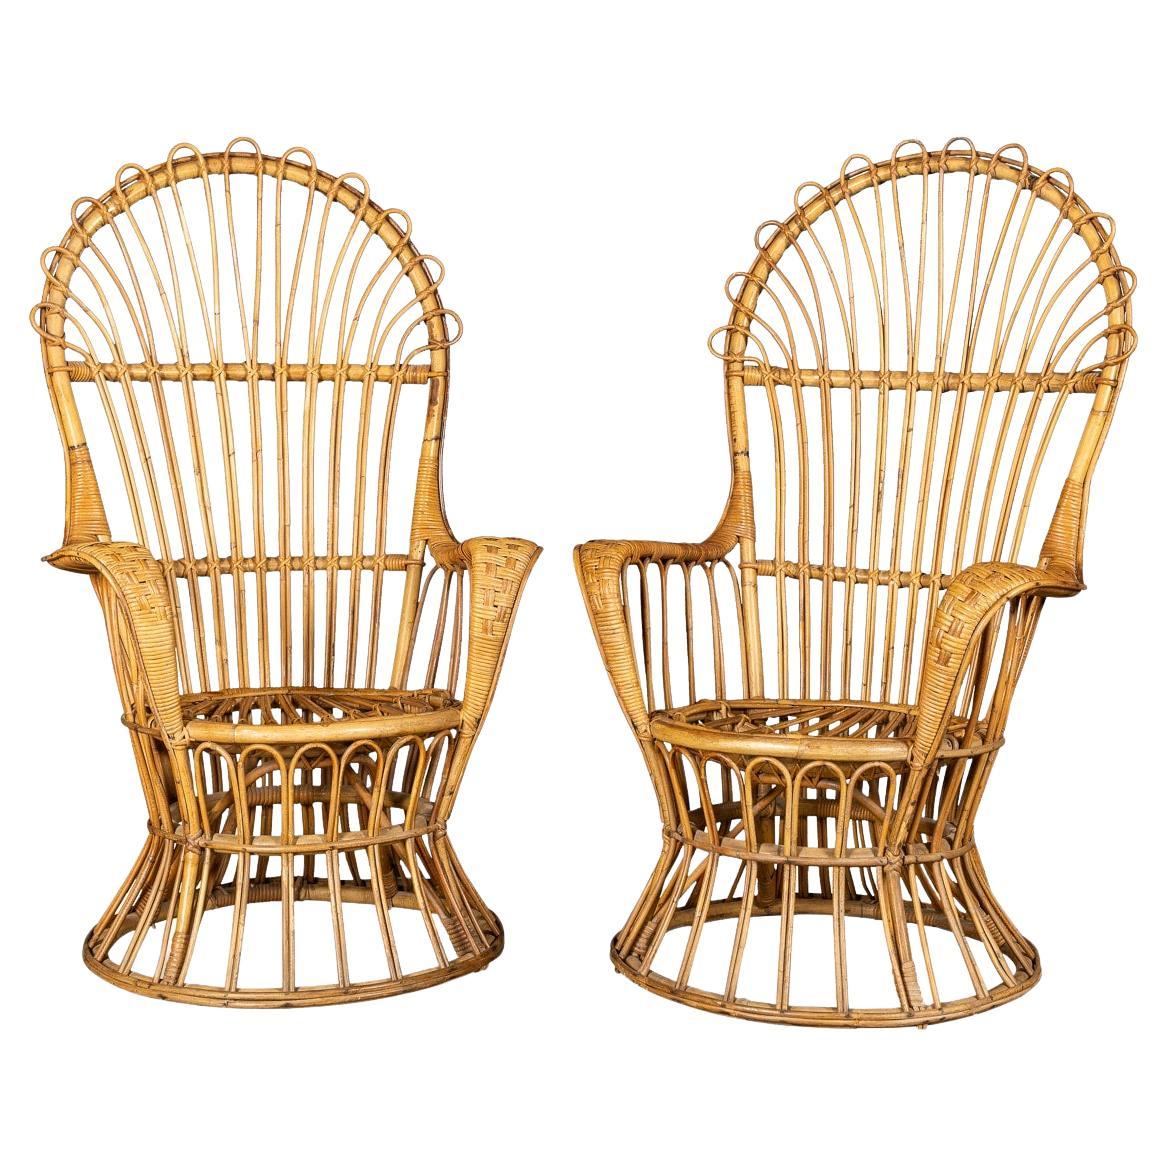 20th Century High Back Chair in Bamboo & Rattan